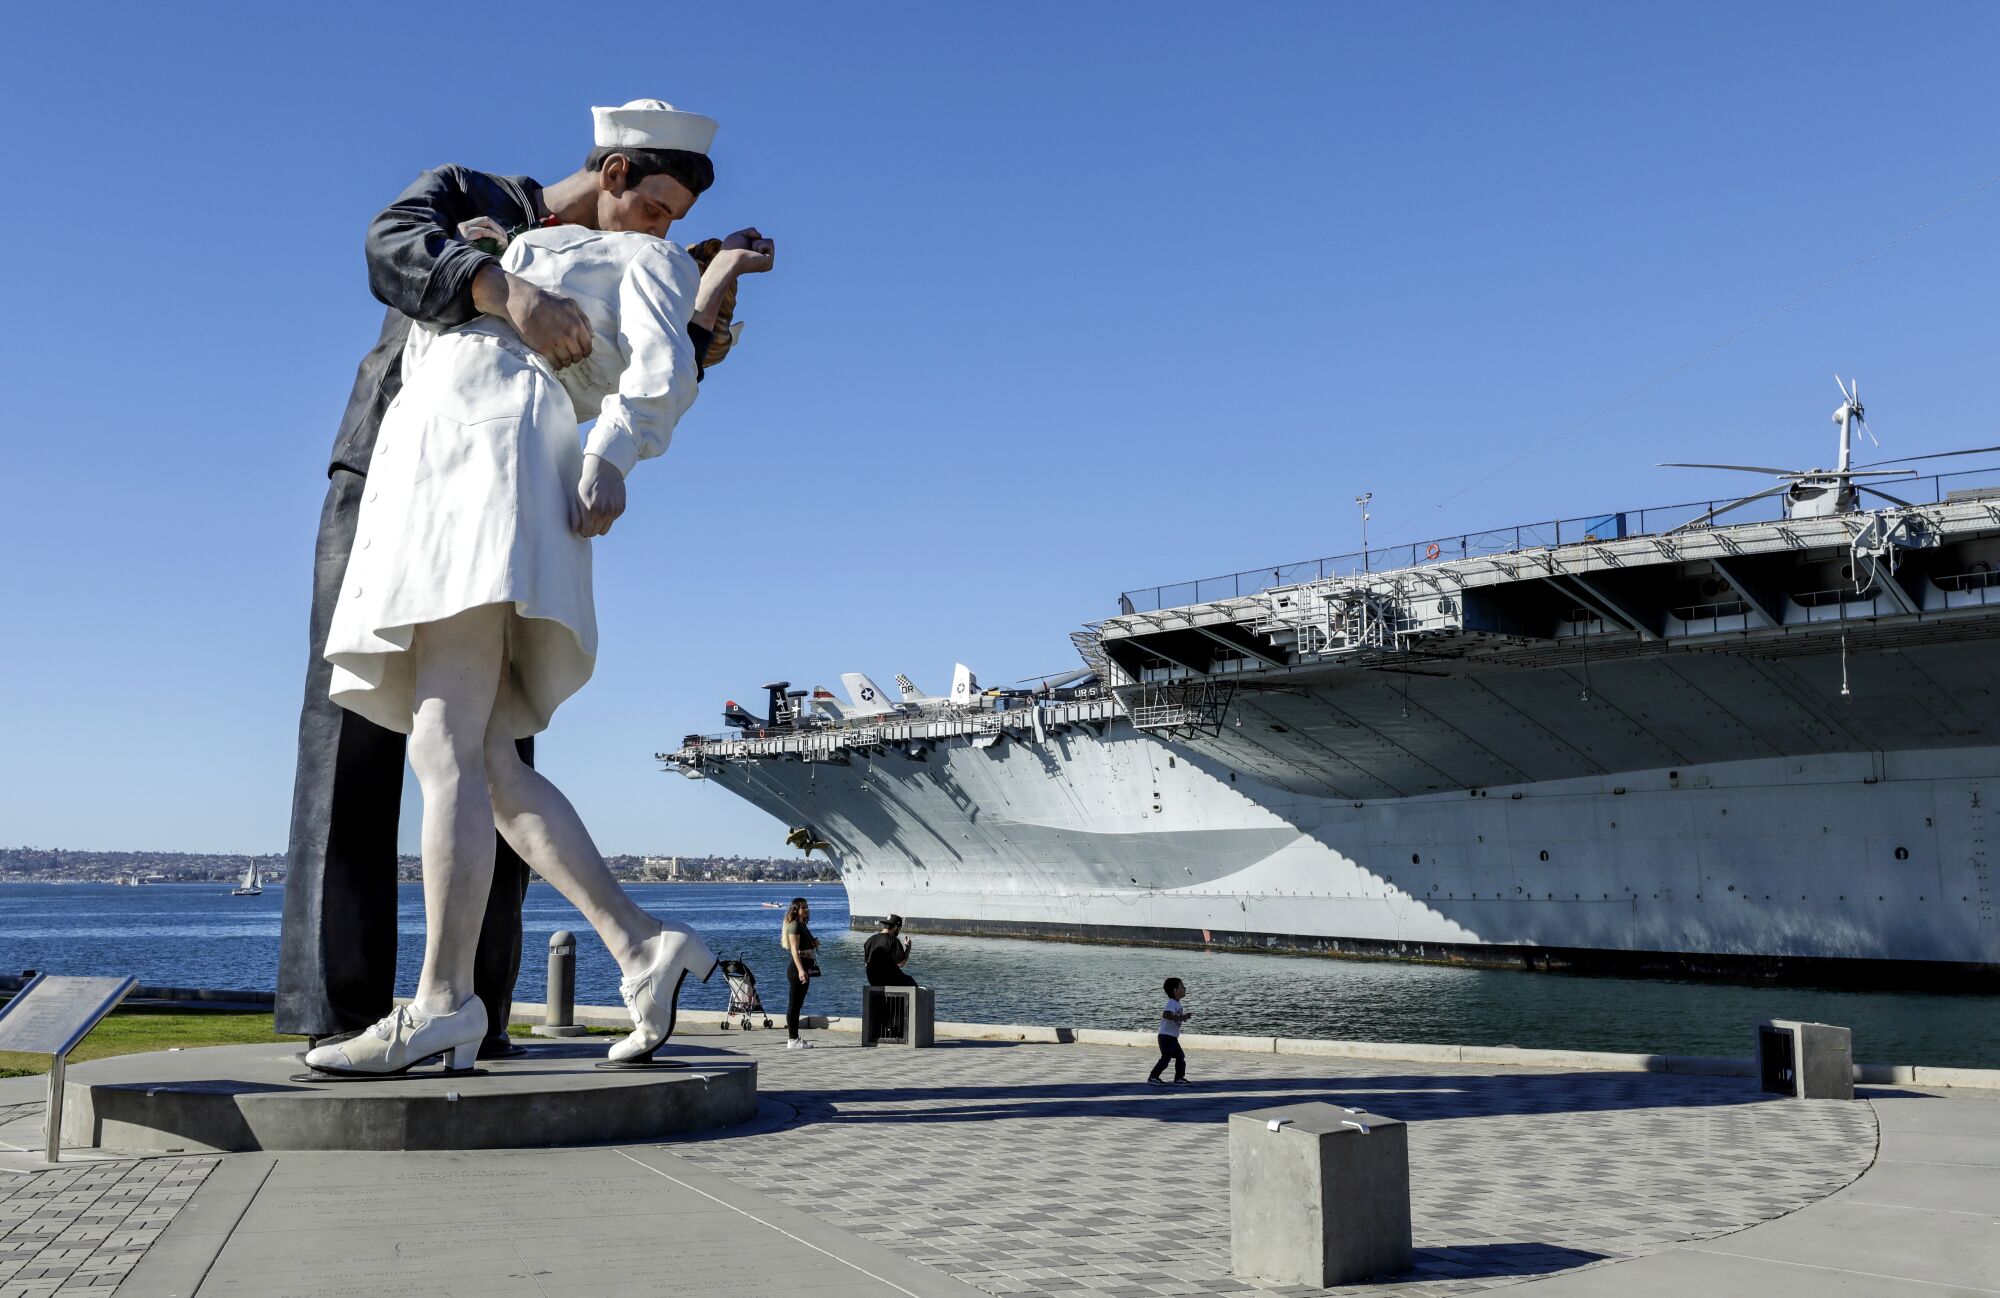 The "Unconditional Surrender" sculpture at Tuna Harbor Park resembles the photo of a sailor kissing a nurse in Times Square.